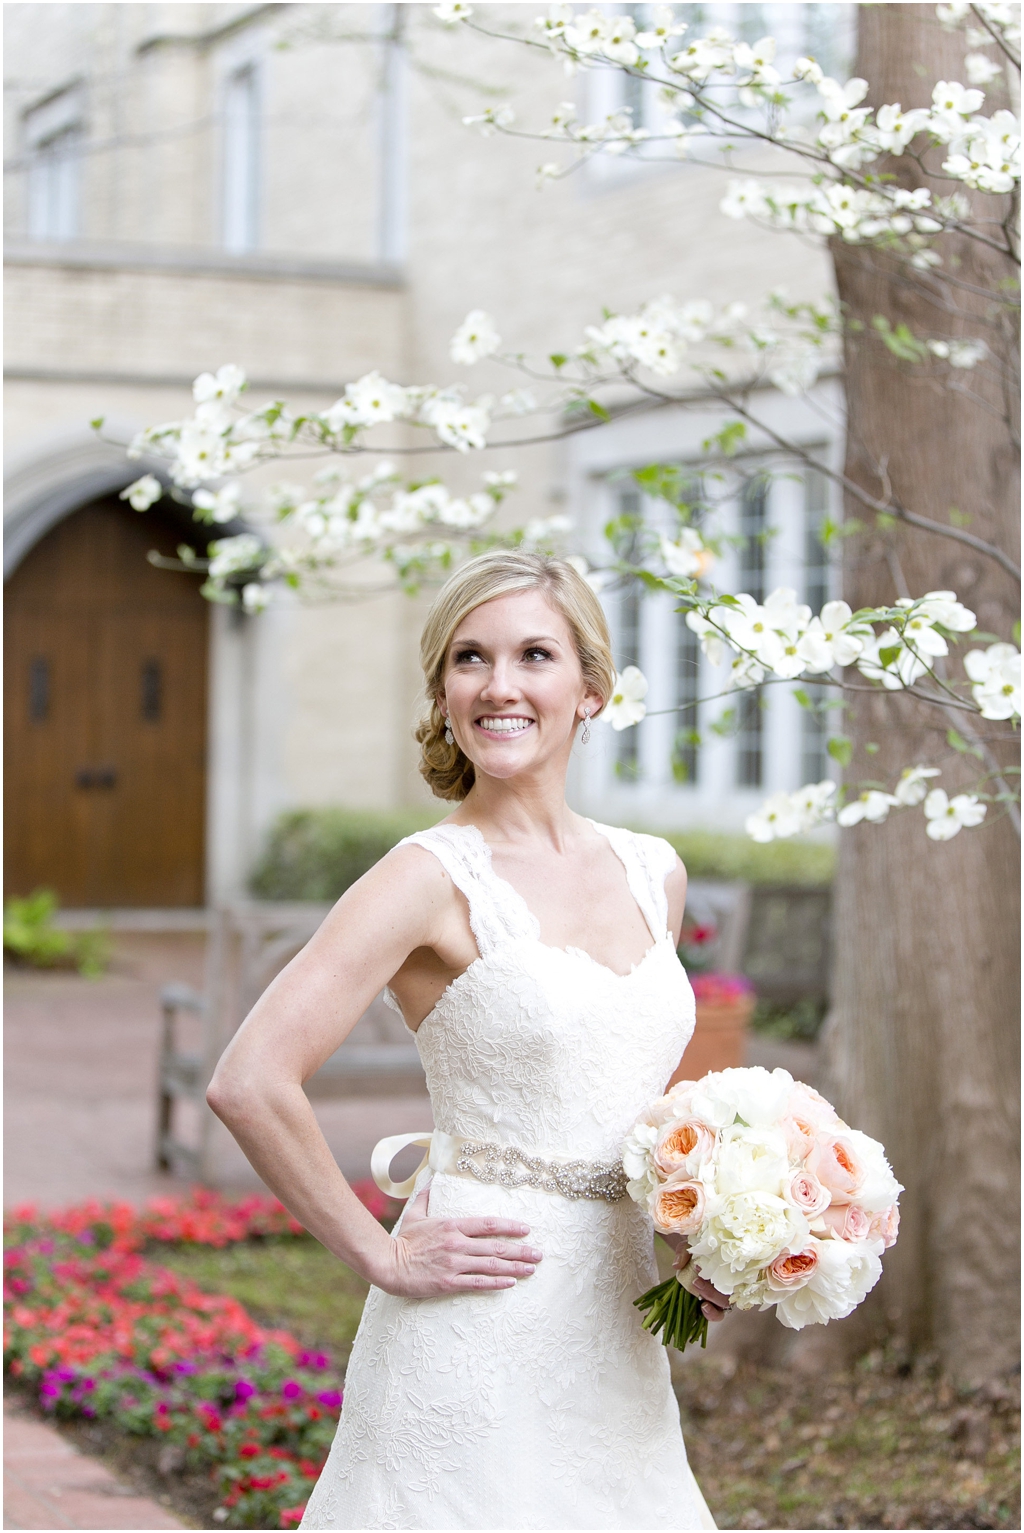 View More: http://maryfieldsphotography.pass.us/castellaw-bridals-2014